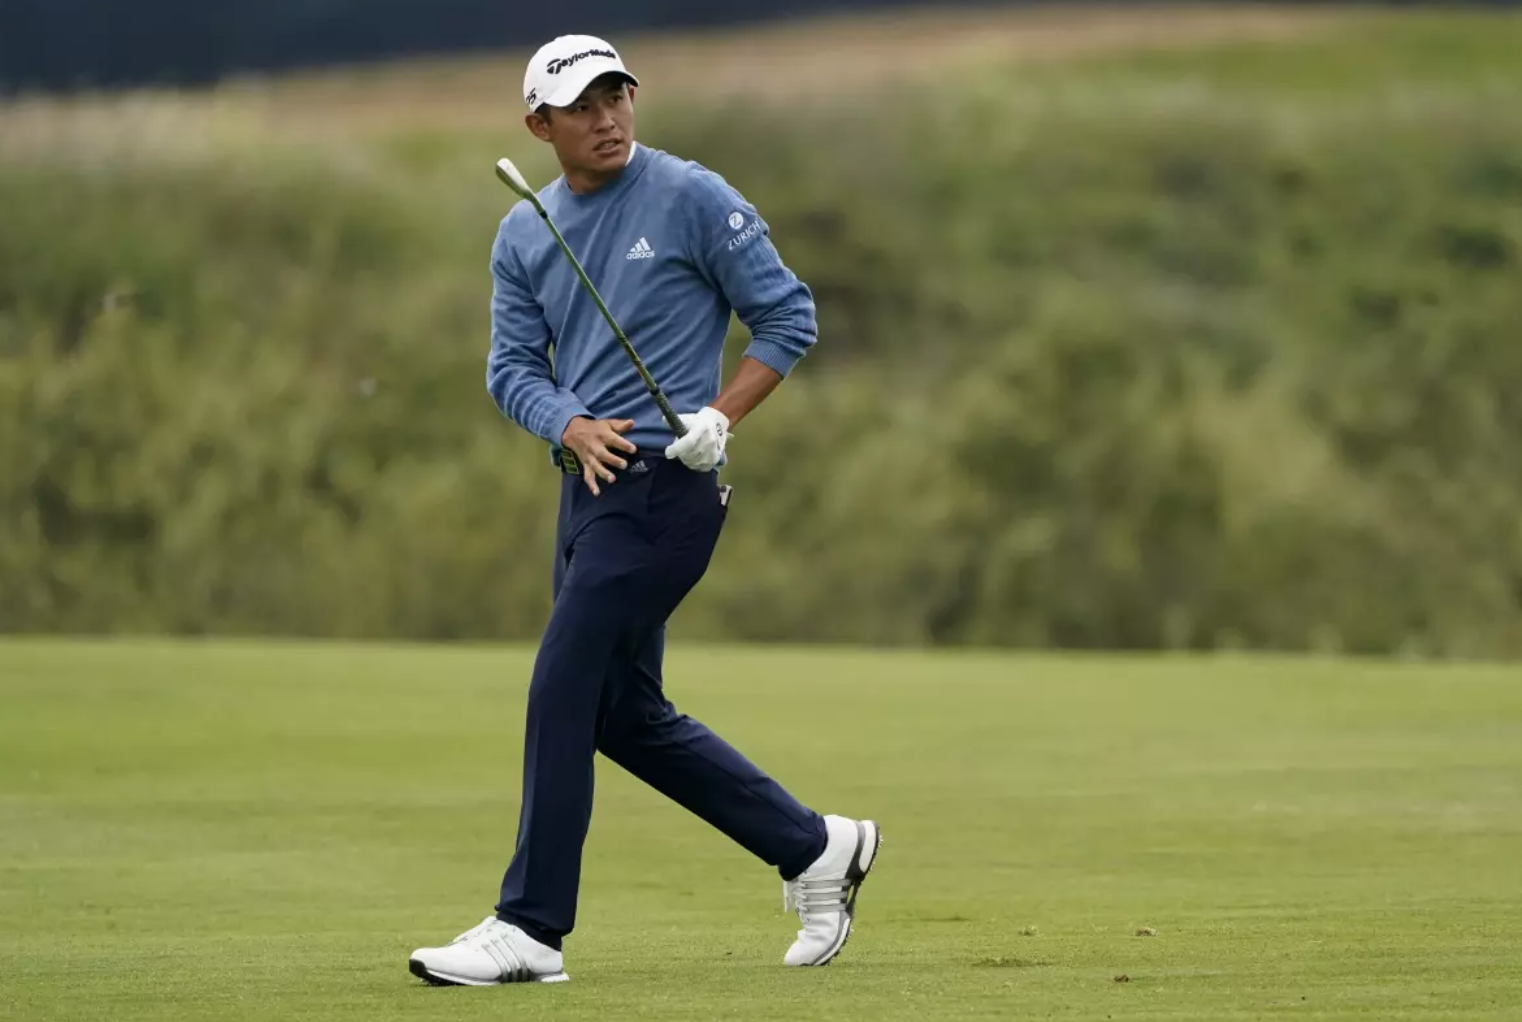 The 152nd Open Championship Players to Watch